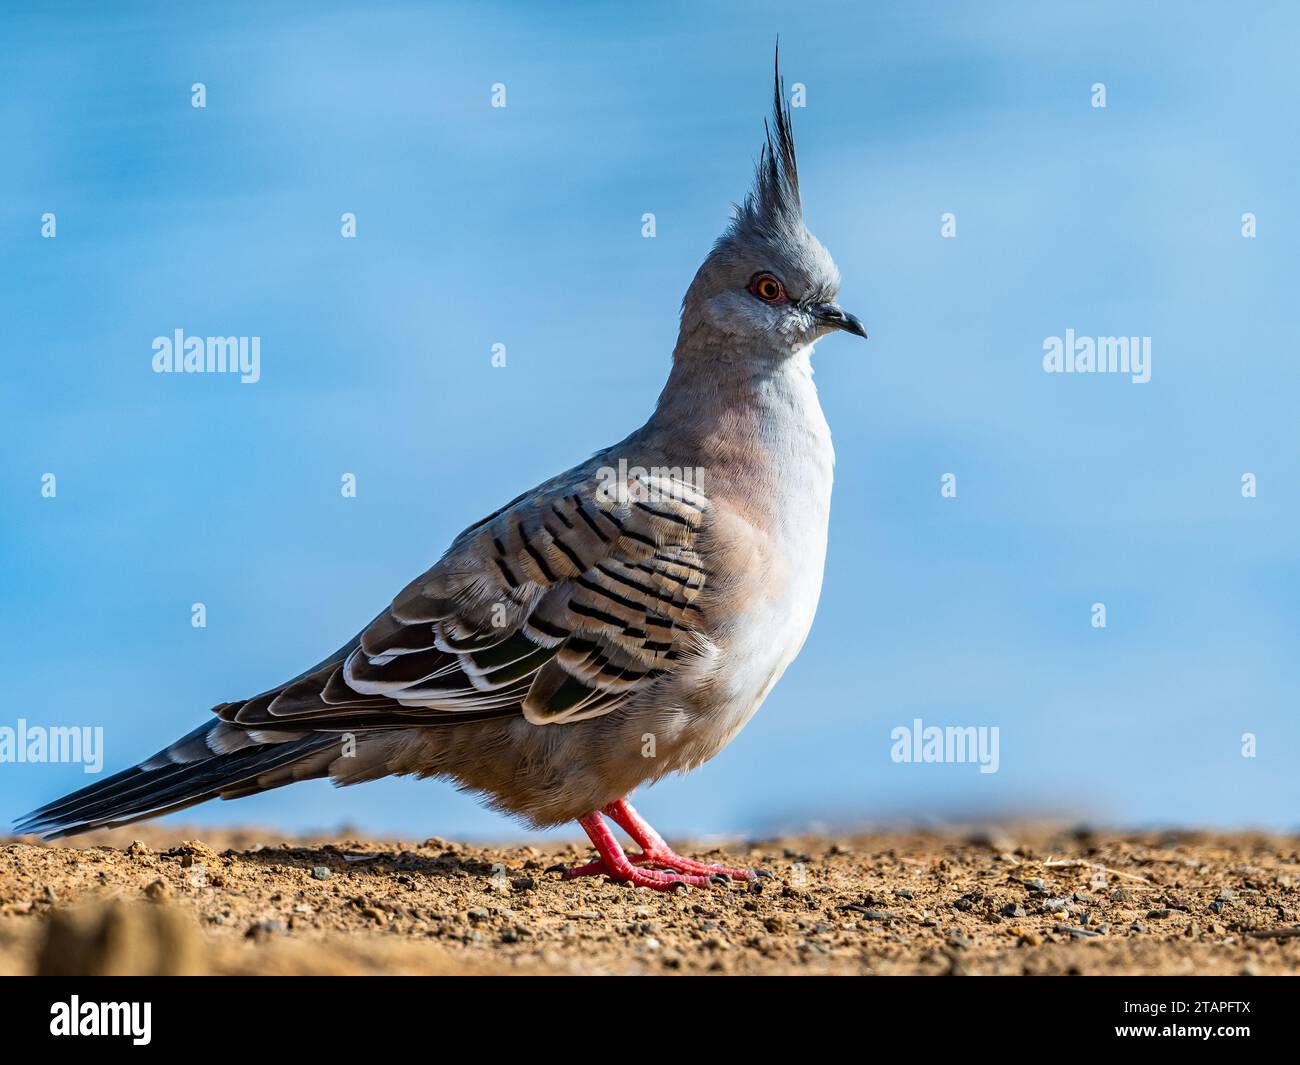 A Crested Pigeon (Ocyphaps lophotes) in the wild. New South Wales, Australia. Stock Photo